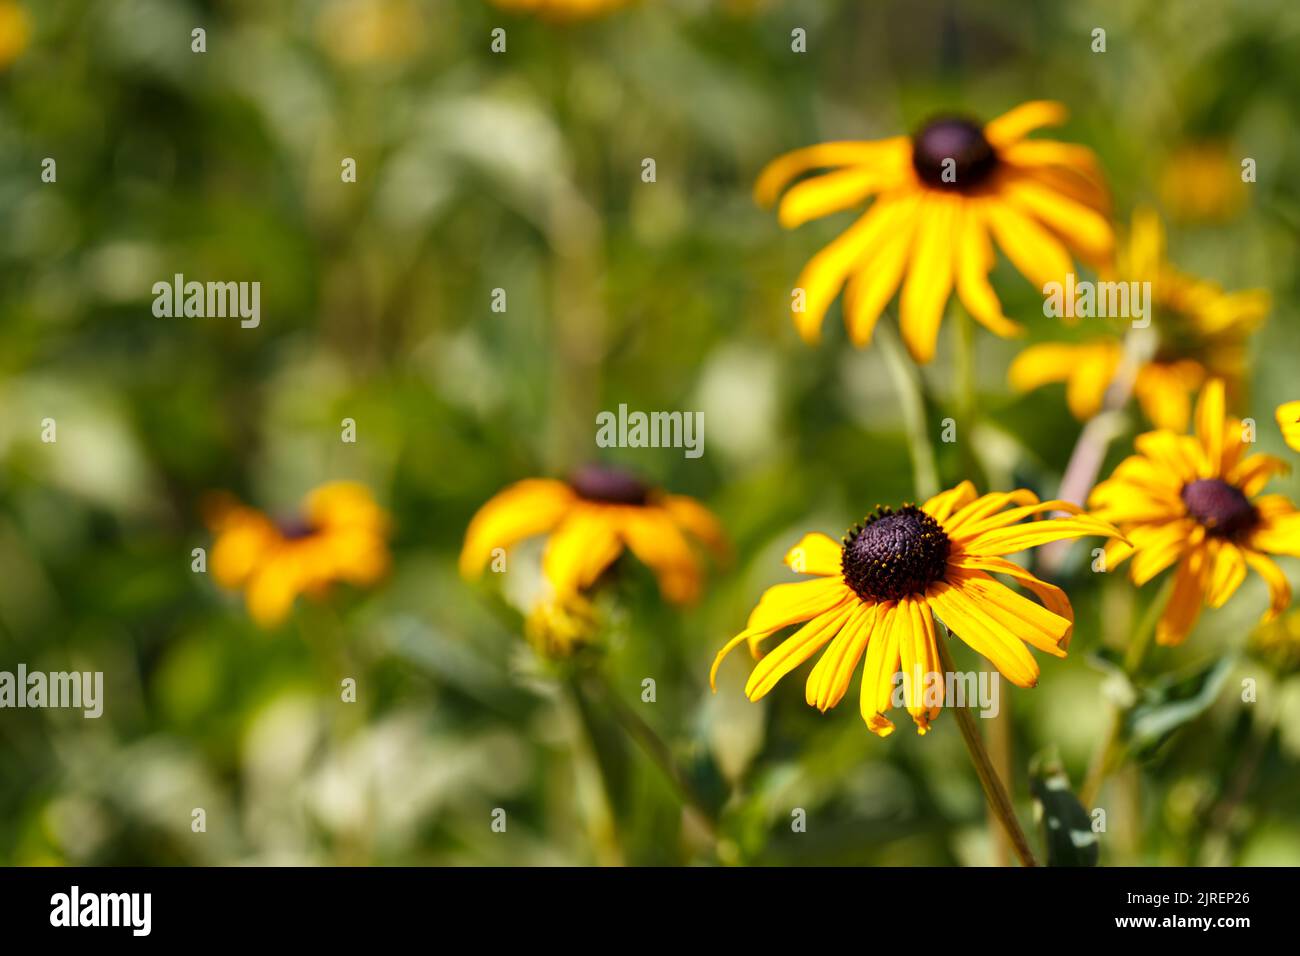 Black eyed Susan or Rudbeckia hirta, North American flowers in a garden or park Stock Photo